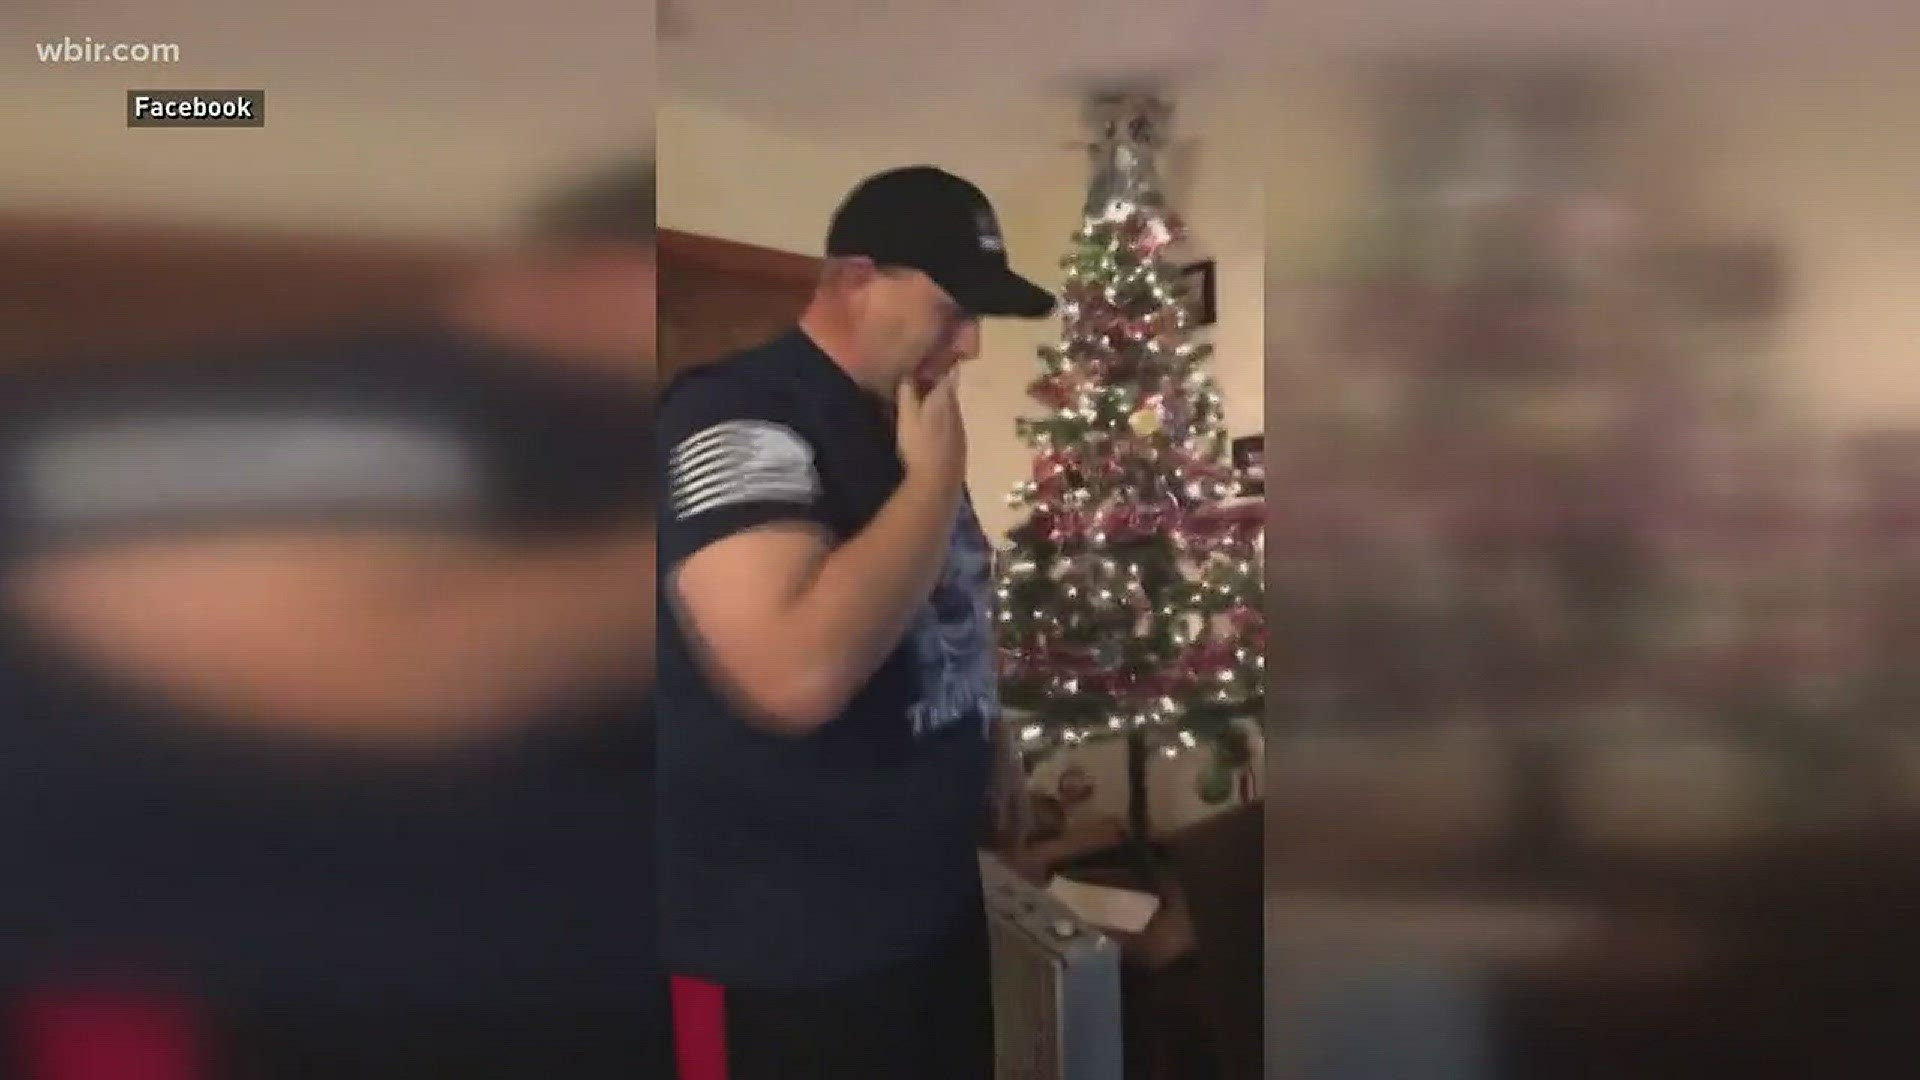 Officer Travis Wheat was released from the hospital in time to spend the holidays at home.